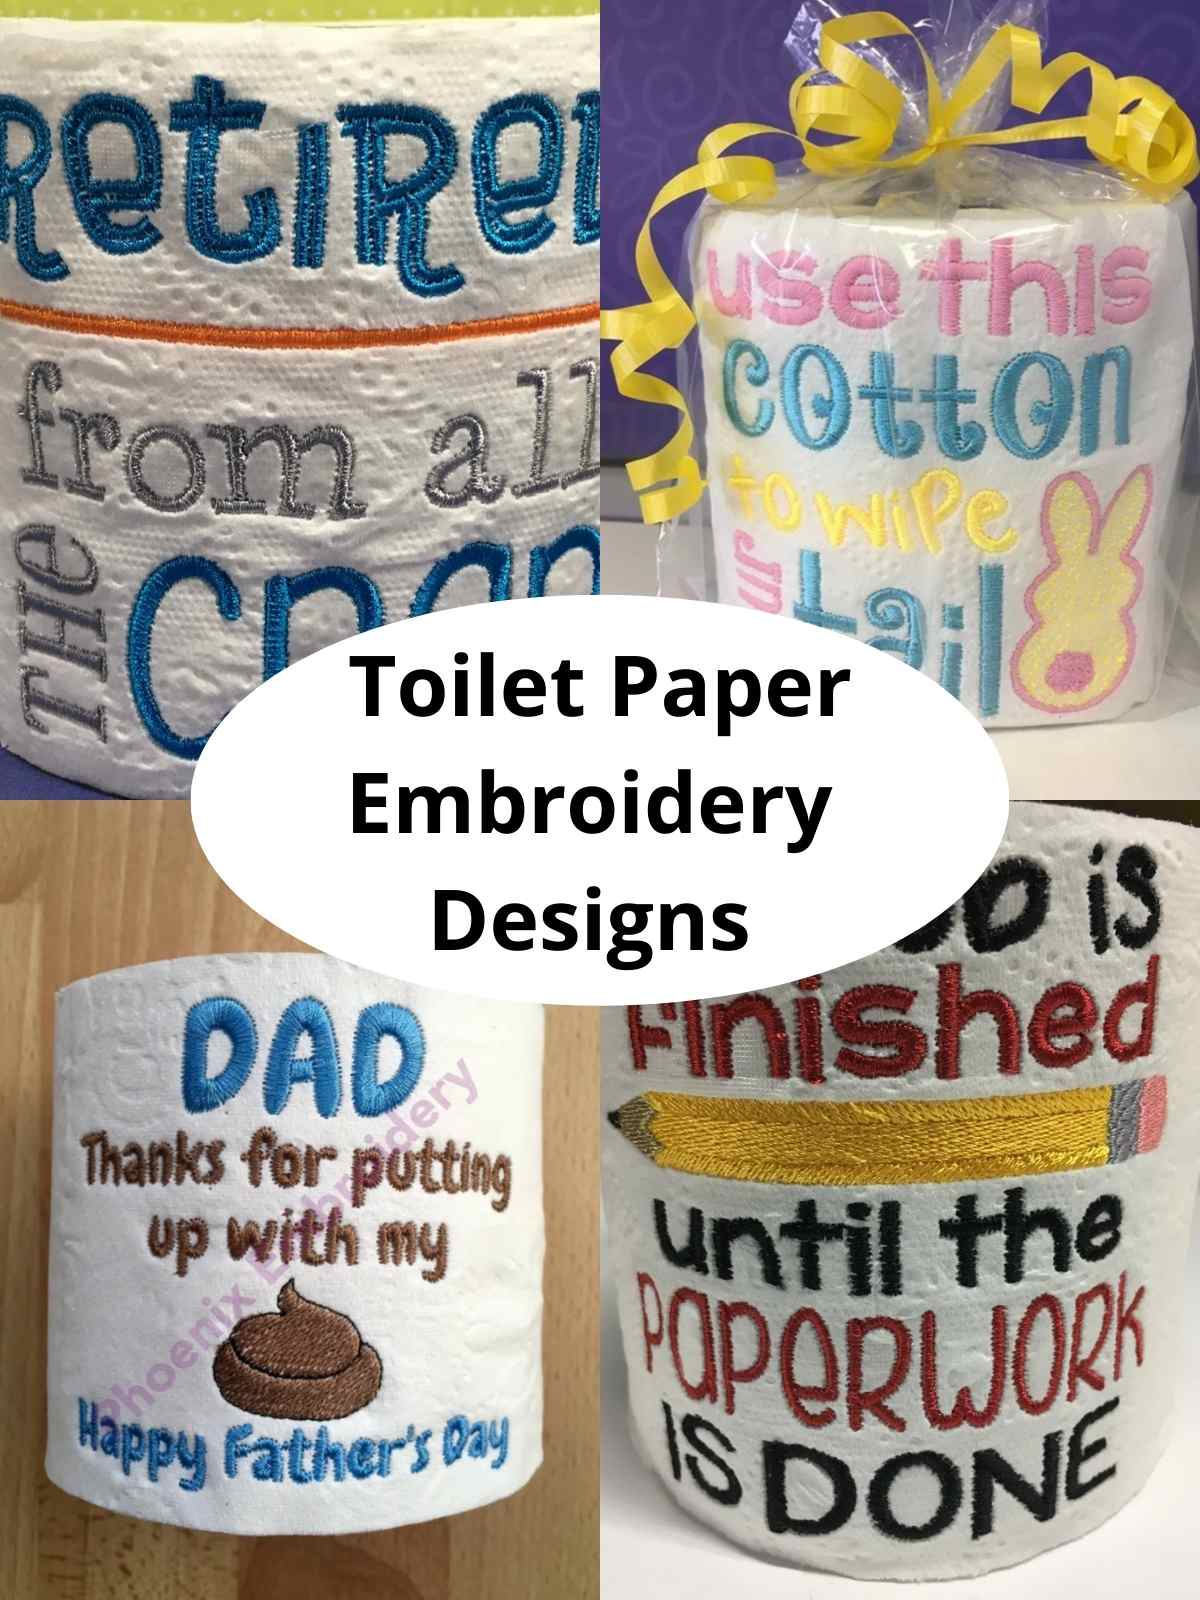 Toilet Paper Embroidery Designs